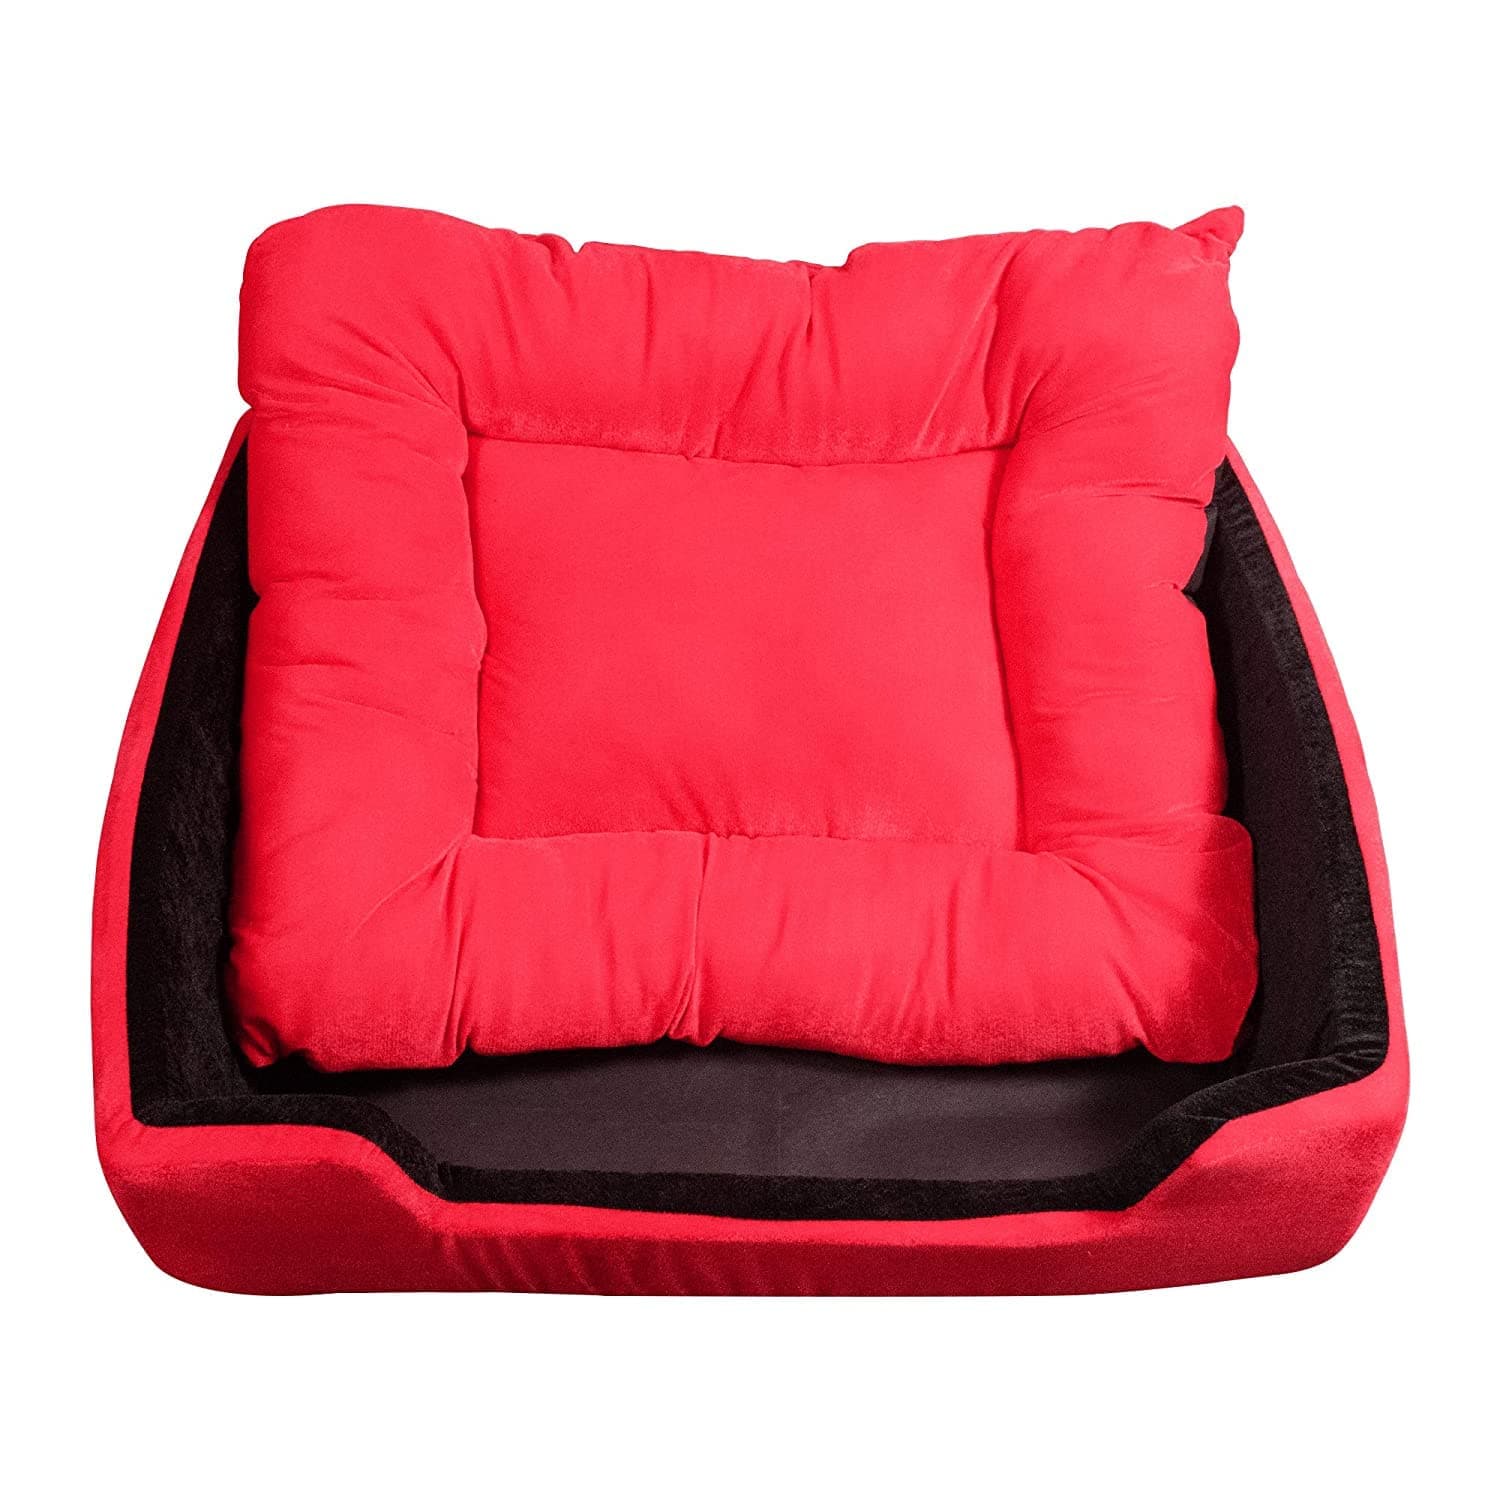 Hiputee Super Soft Dual Rectangle Velvet Bed for Dogs and Cats (Red Black)